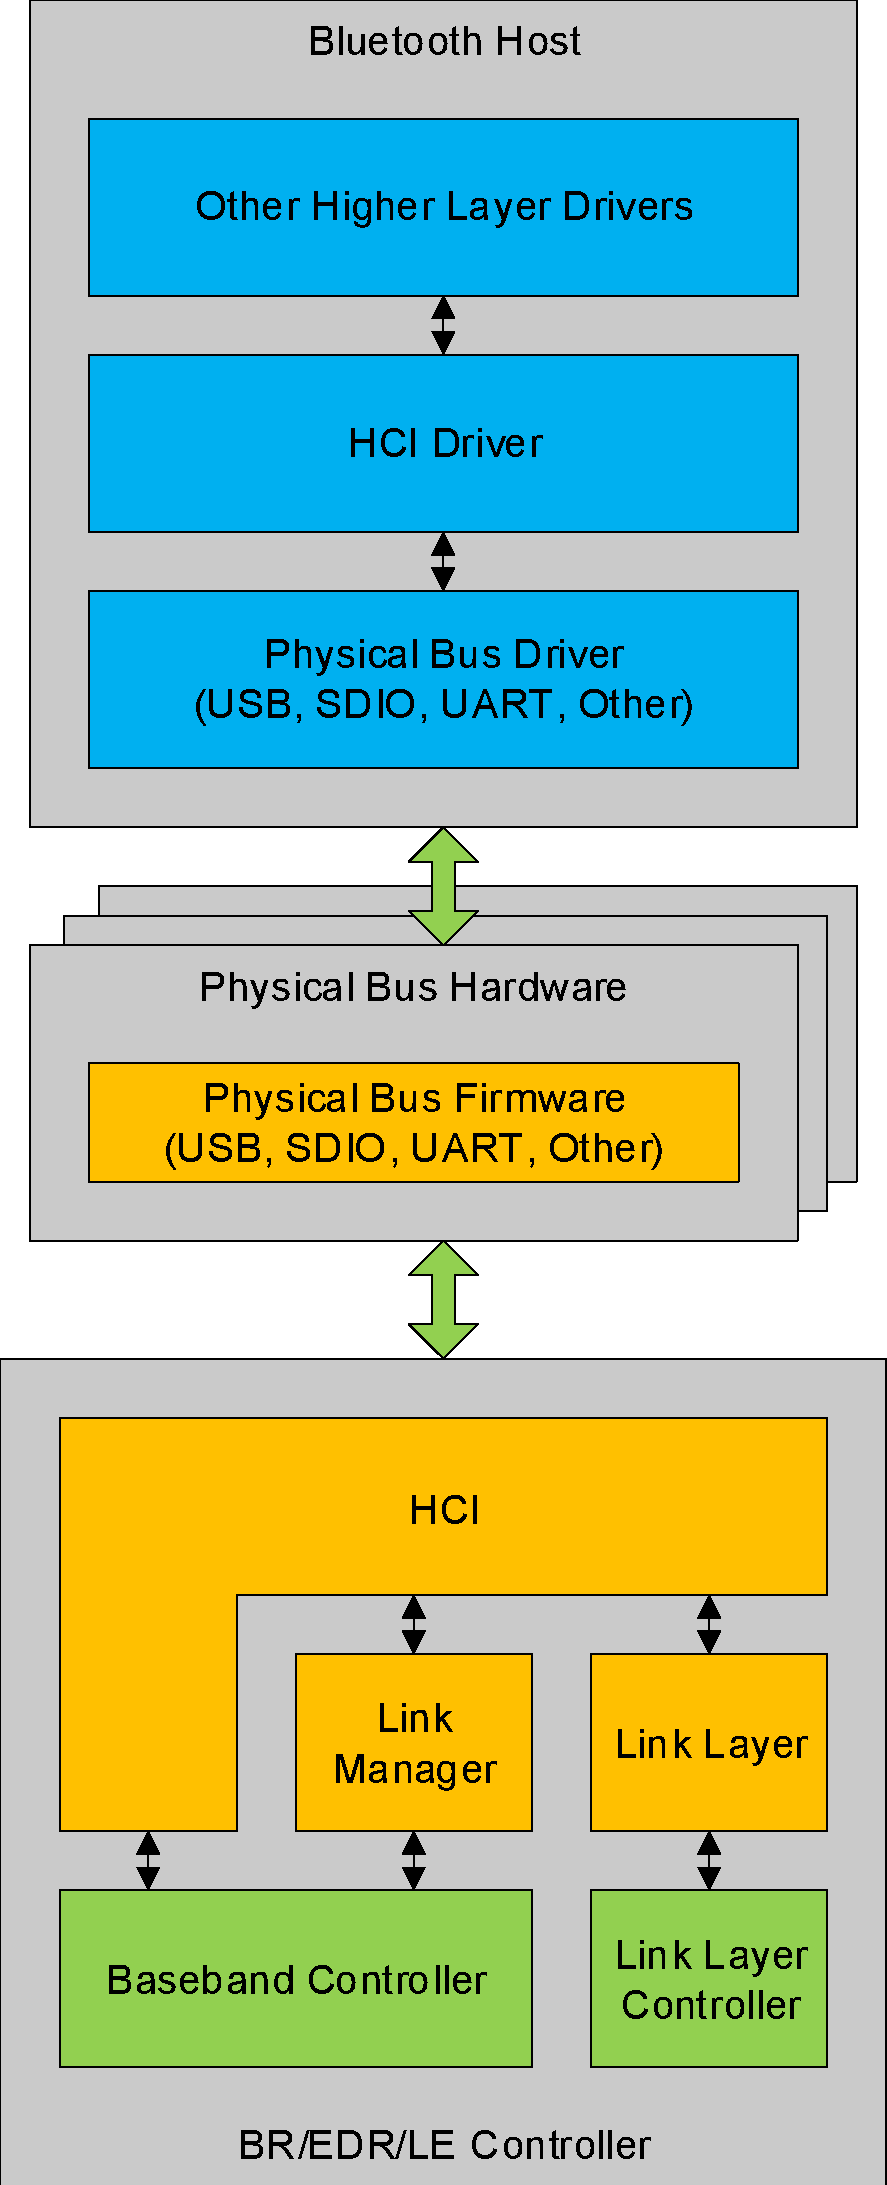 Overview of the lower software layers